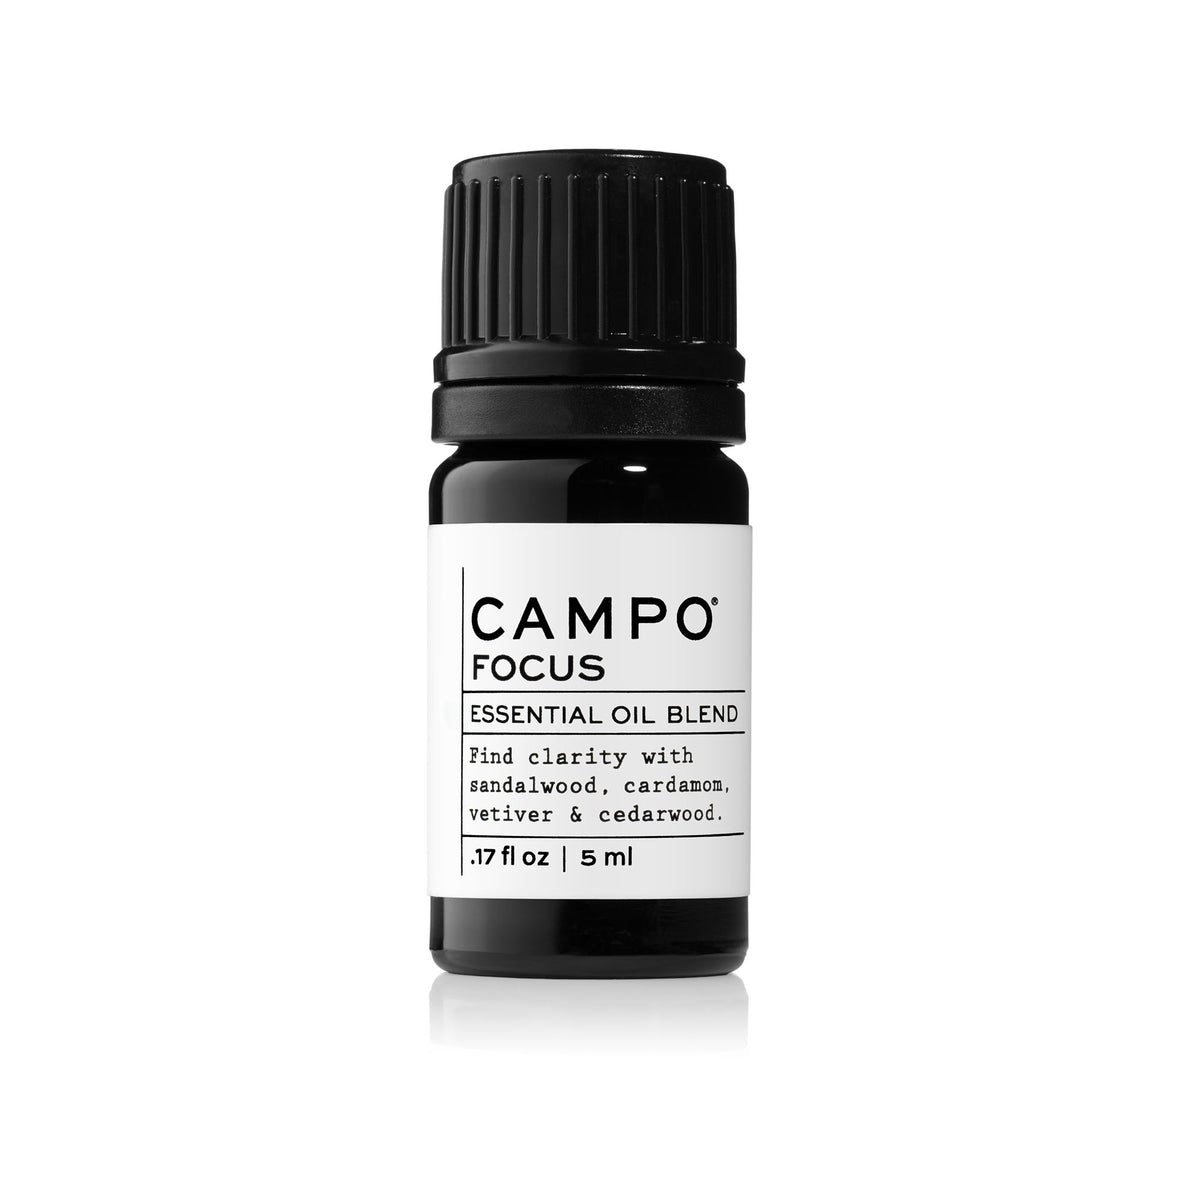 Campo Beauty FOCUS Blend 5 ml Essential Oil. Inspires feelings of peace and tranquility to promote heightened awareness and mental clarity.  A grounding blend of 100% pure essential oils of warm, woodsy Australian Sandalwood, Cardamom, Vetiver, Cedarwood Virginia, Cedarwood Texas, Cedarwood Himalayan, and Cedarwood Atlas.